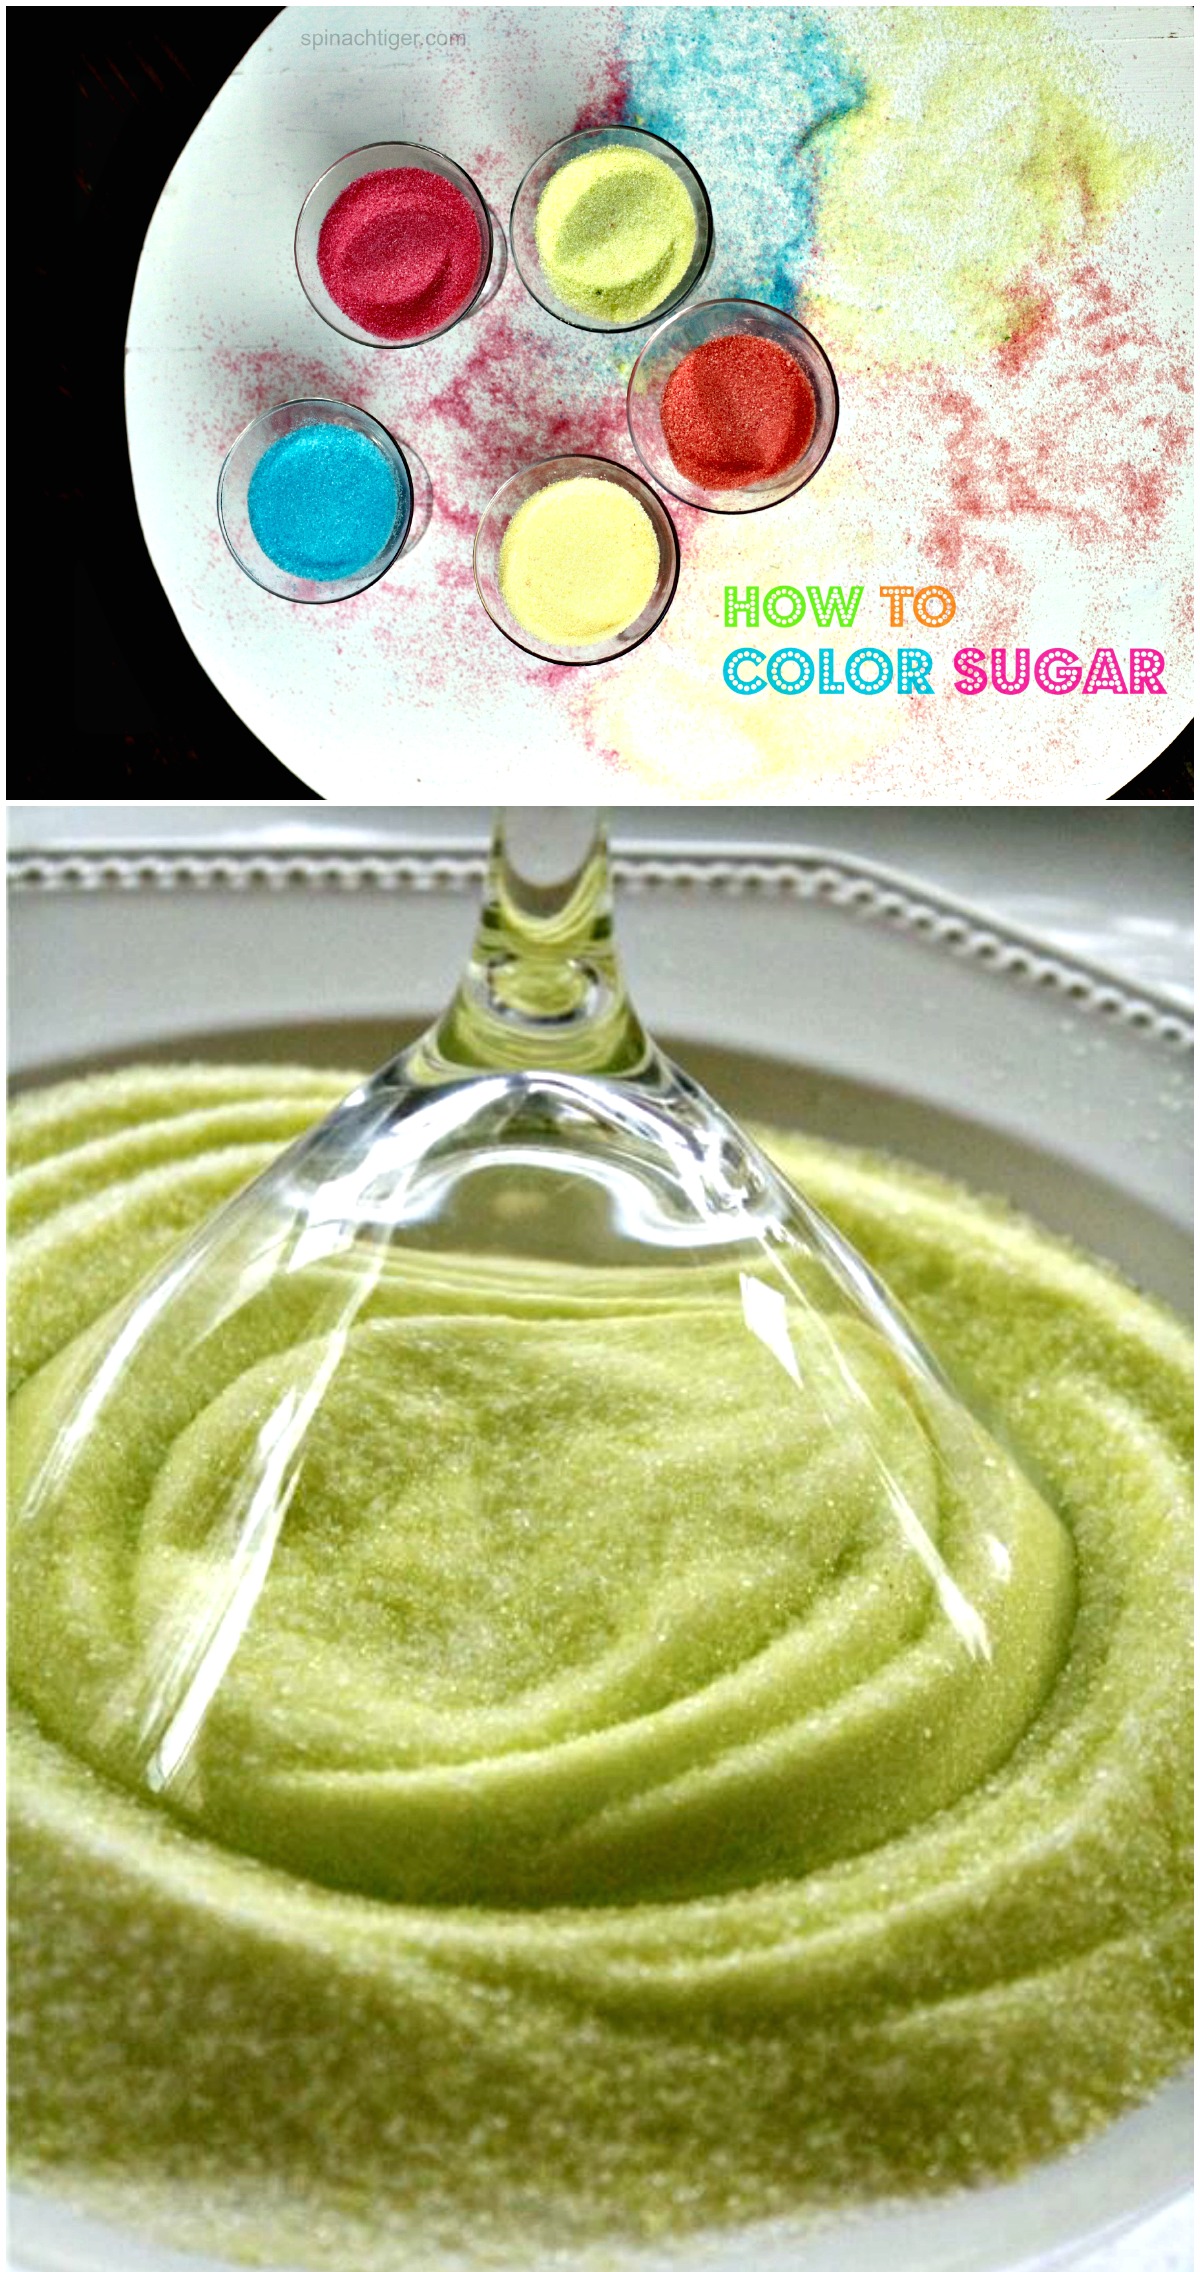 Best Way to Color Sugar from Spinach Tiger